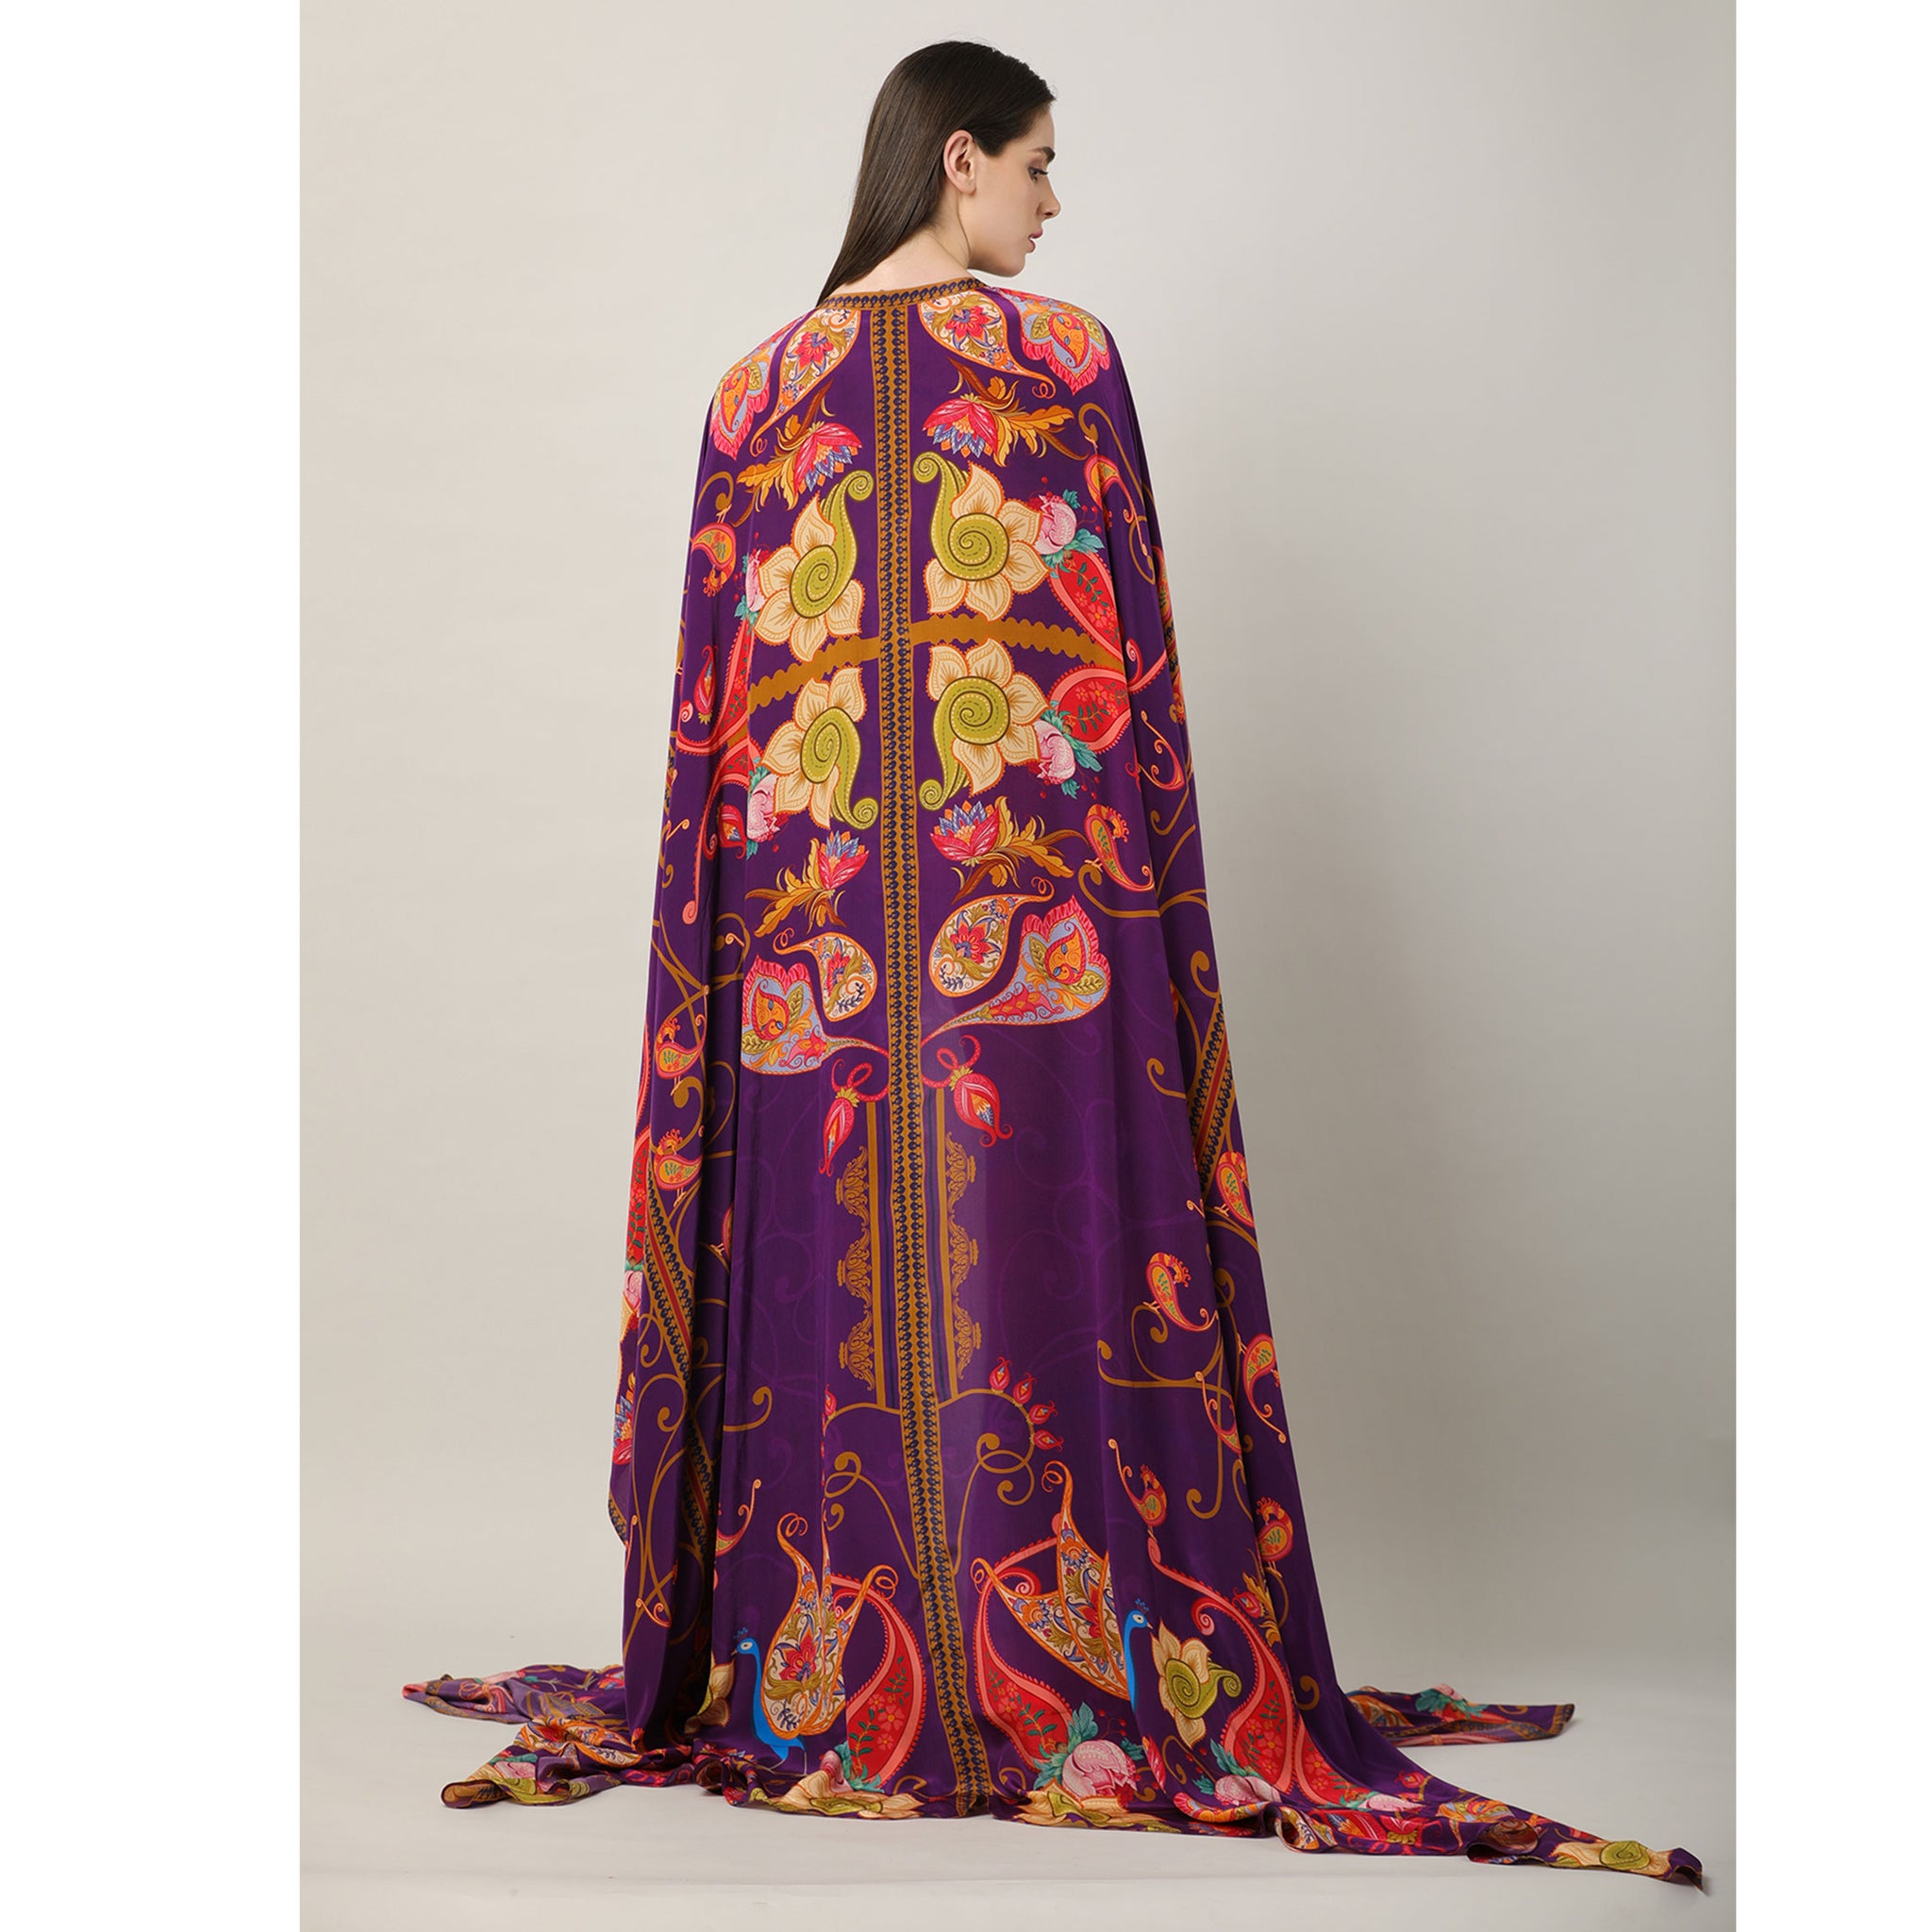 Statement Embroidered Cape